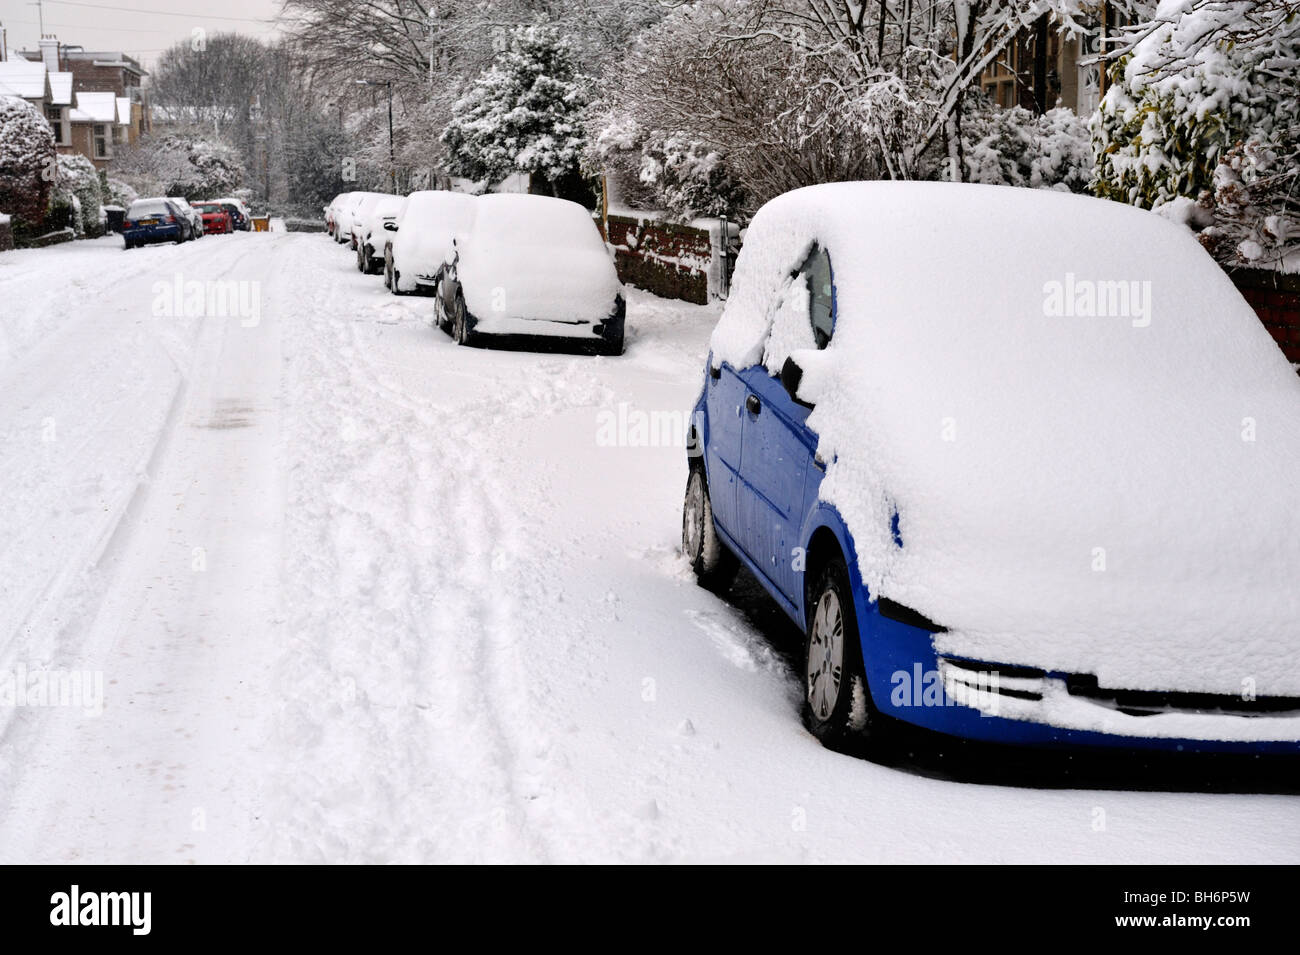 Snow covered parked cars on residential street, Bristol, UK Stock Photo